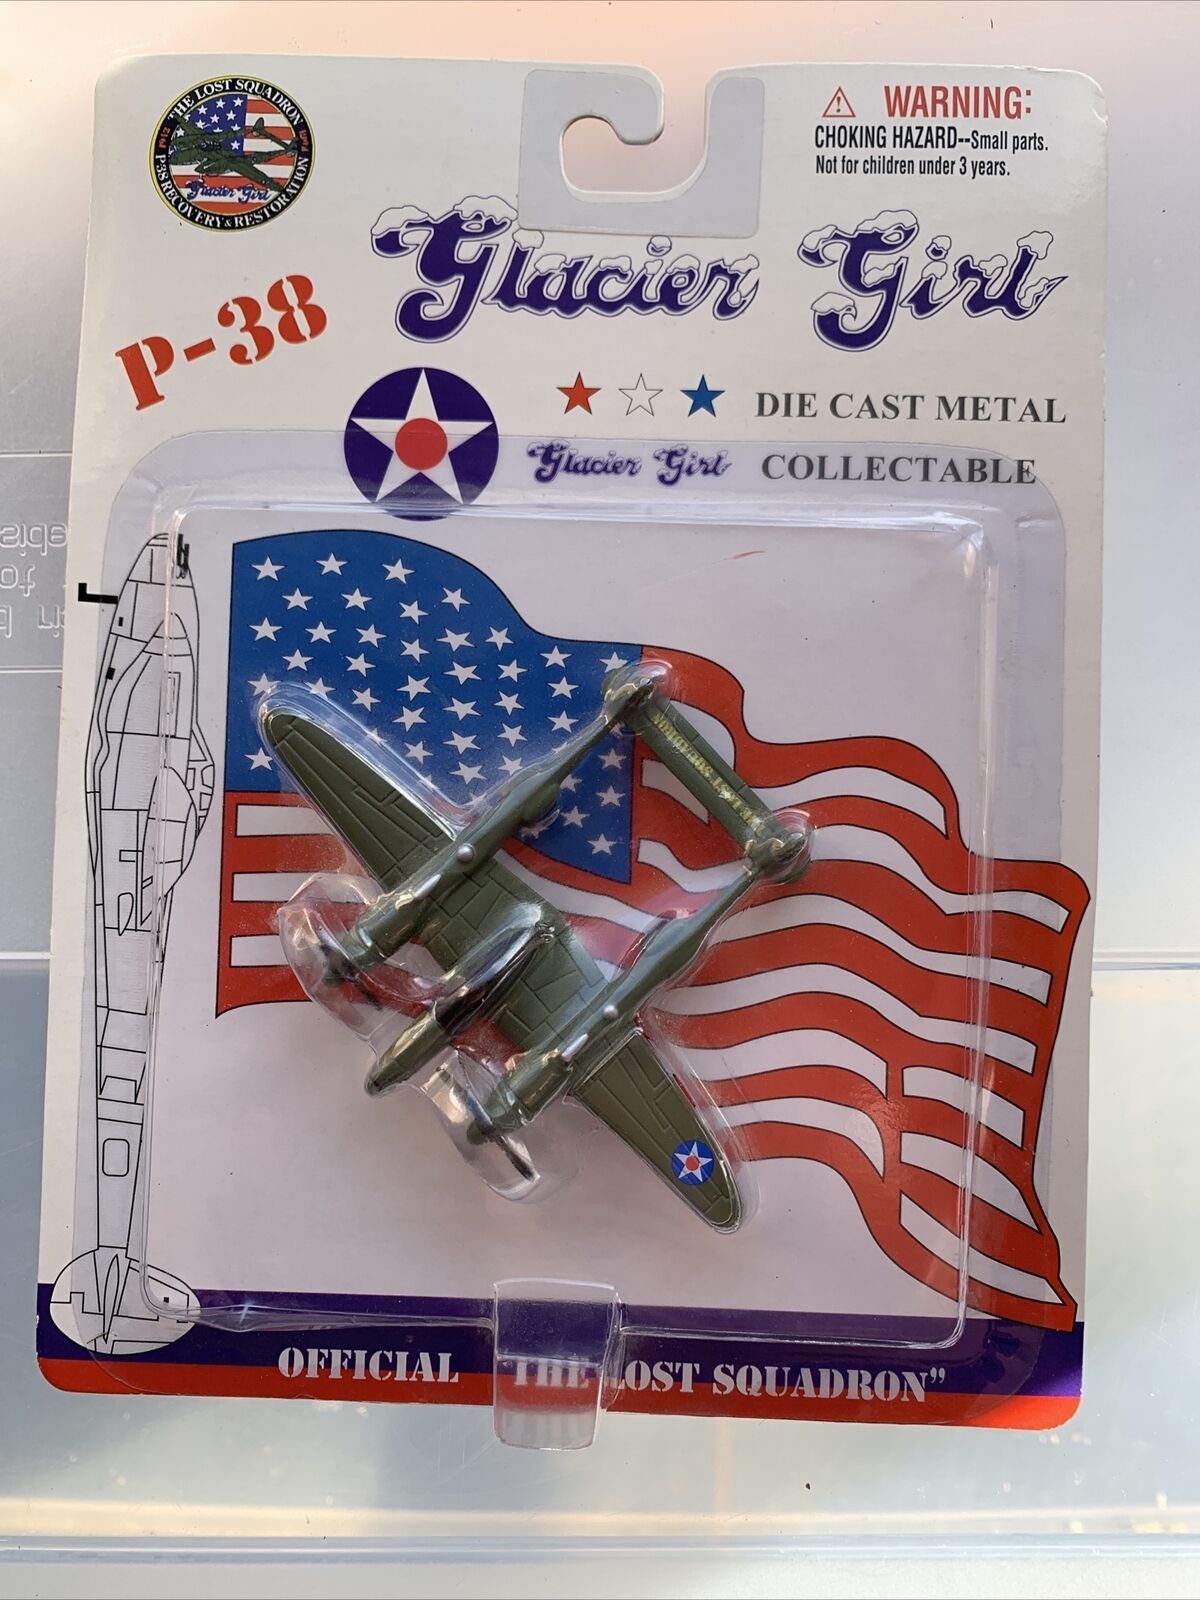 P-38 Glacier Girl Die Cast Metal Collectible Official The Lost Squadron 1942 B3